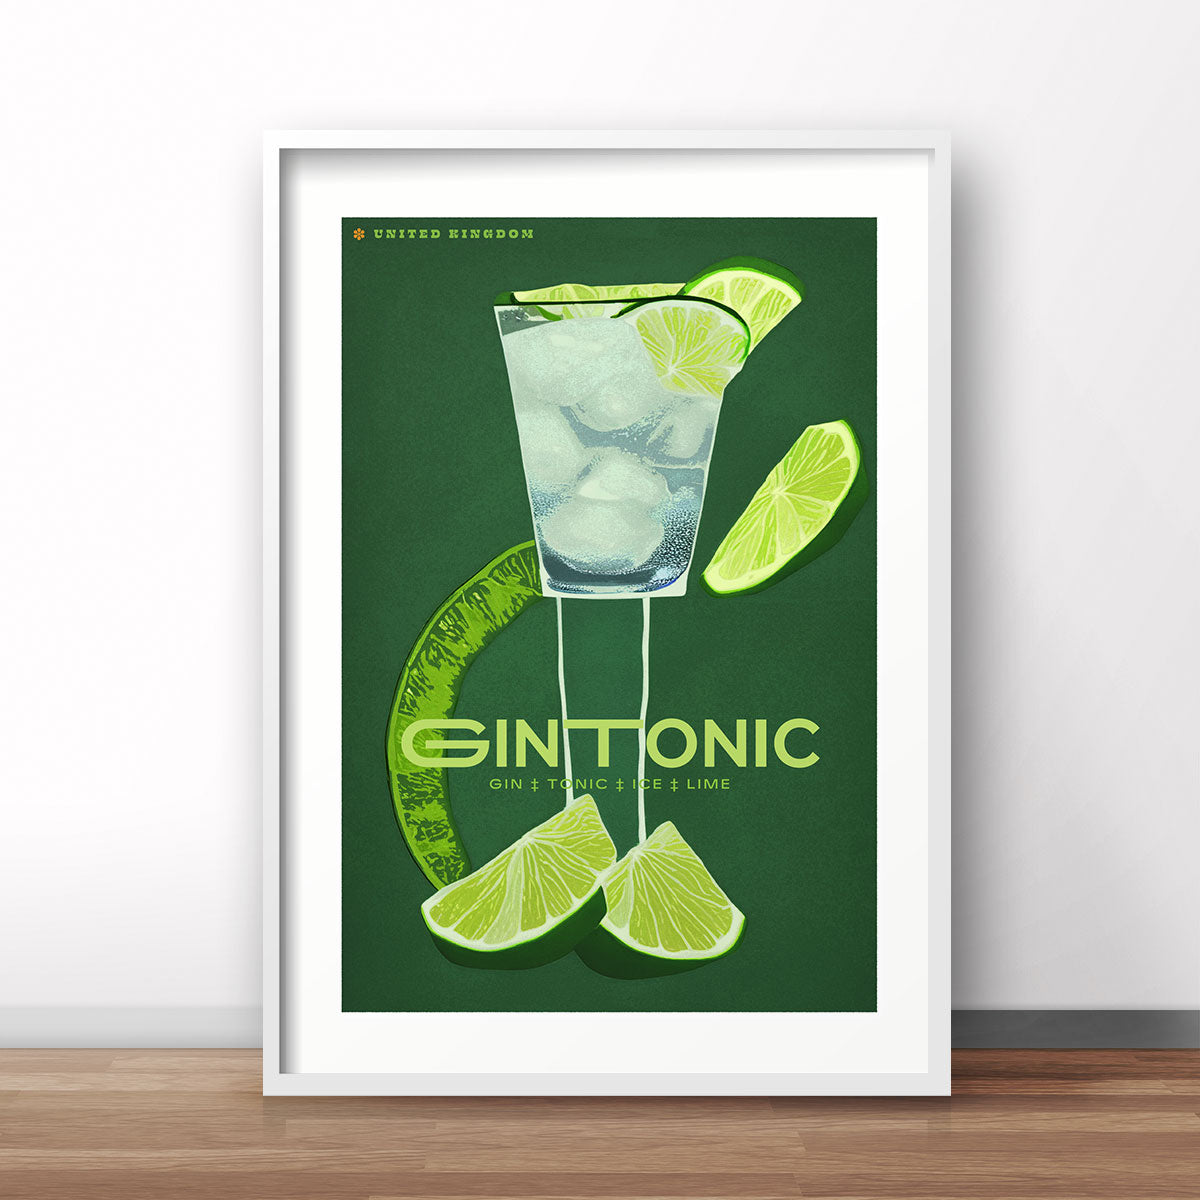 Gin Tonic United Kingdom retro vintage poster print from Places We Luv